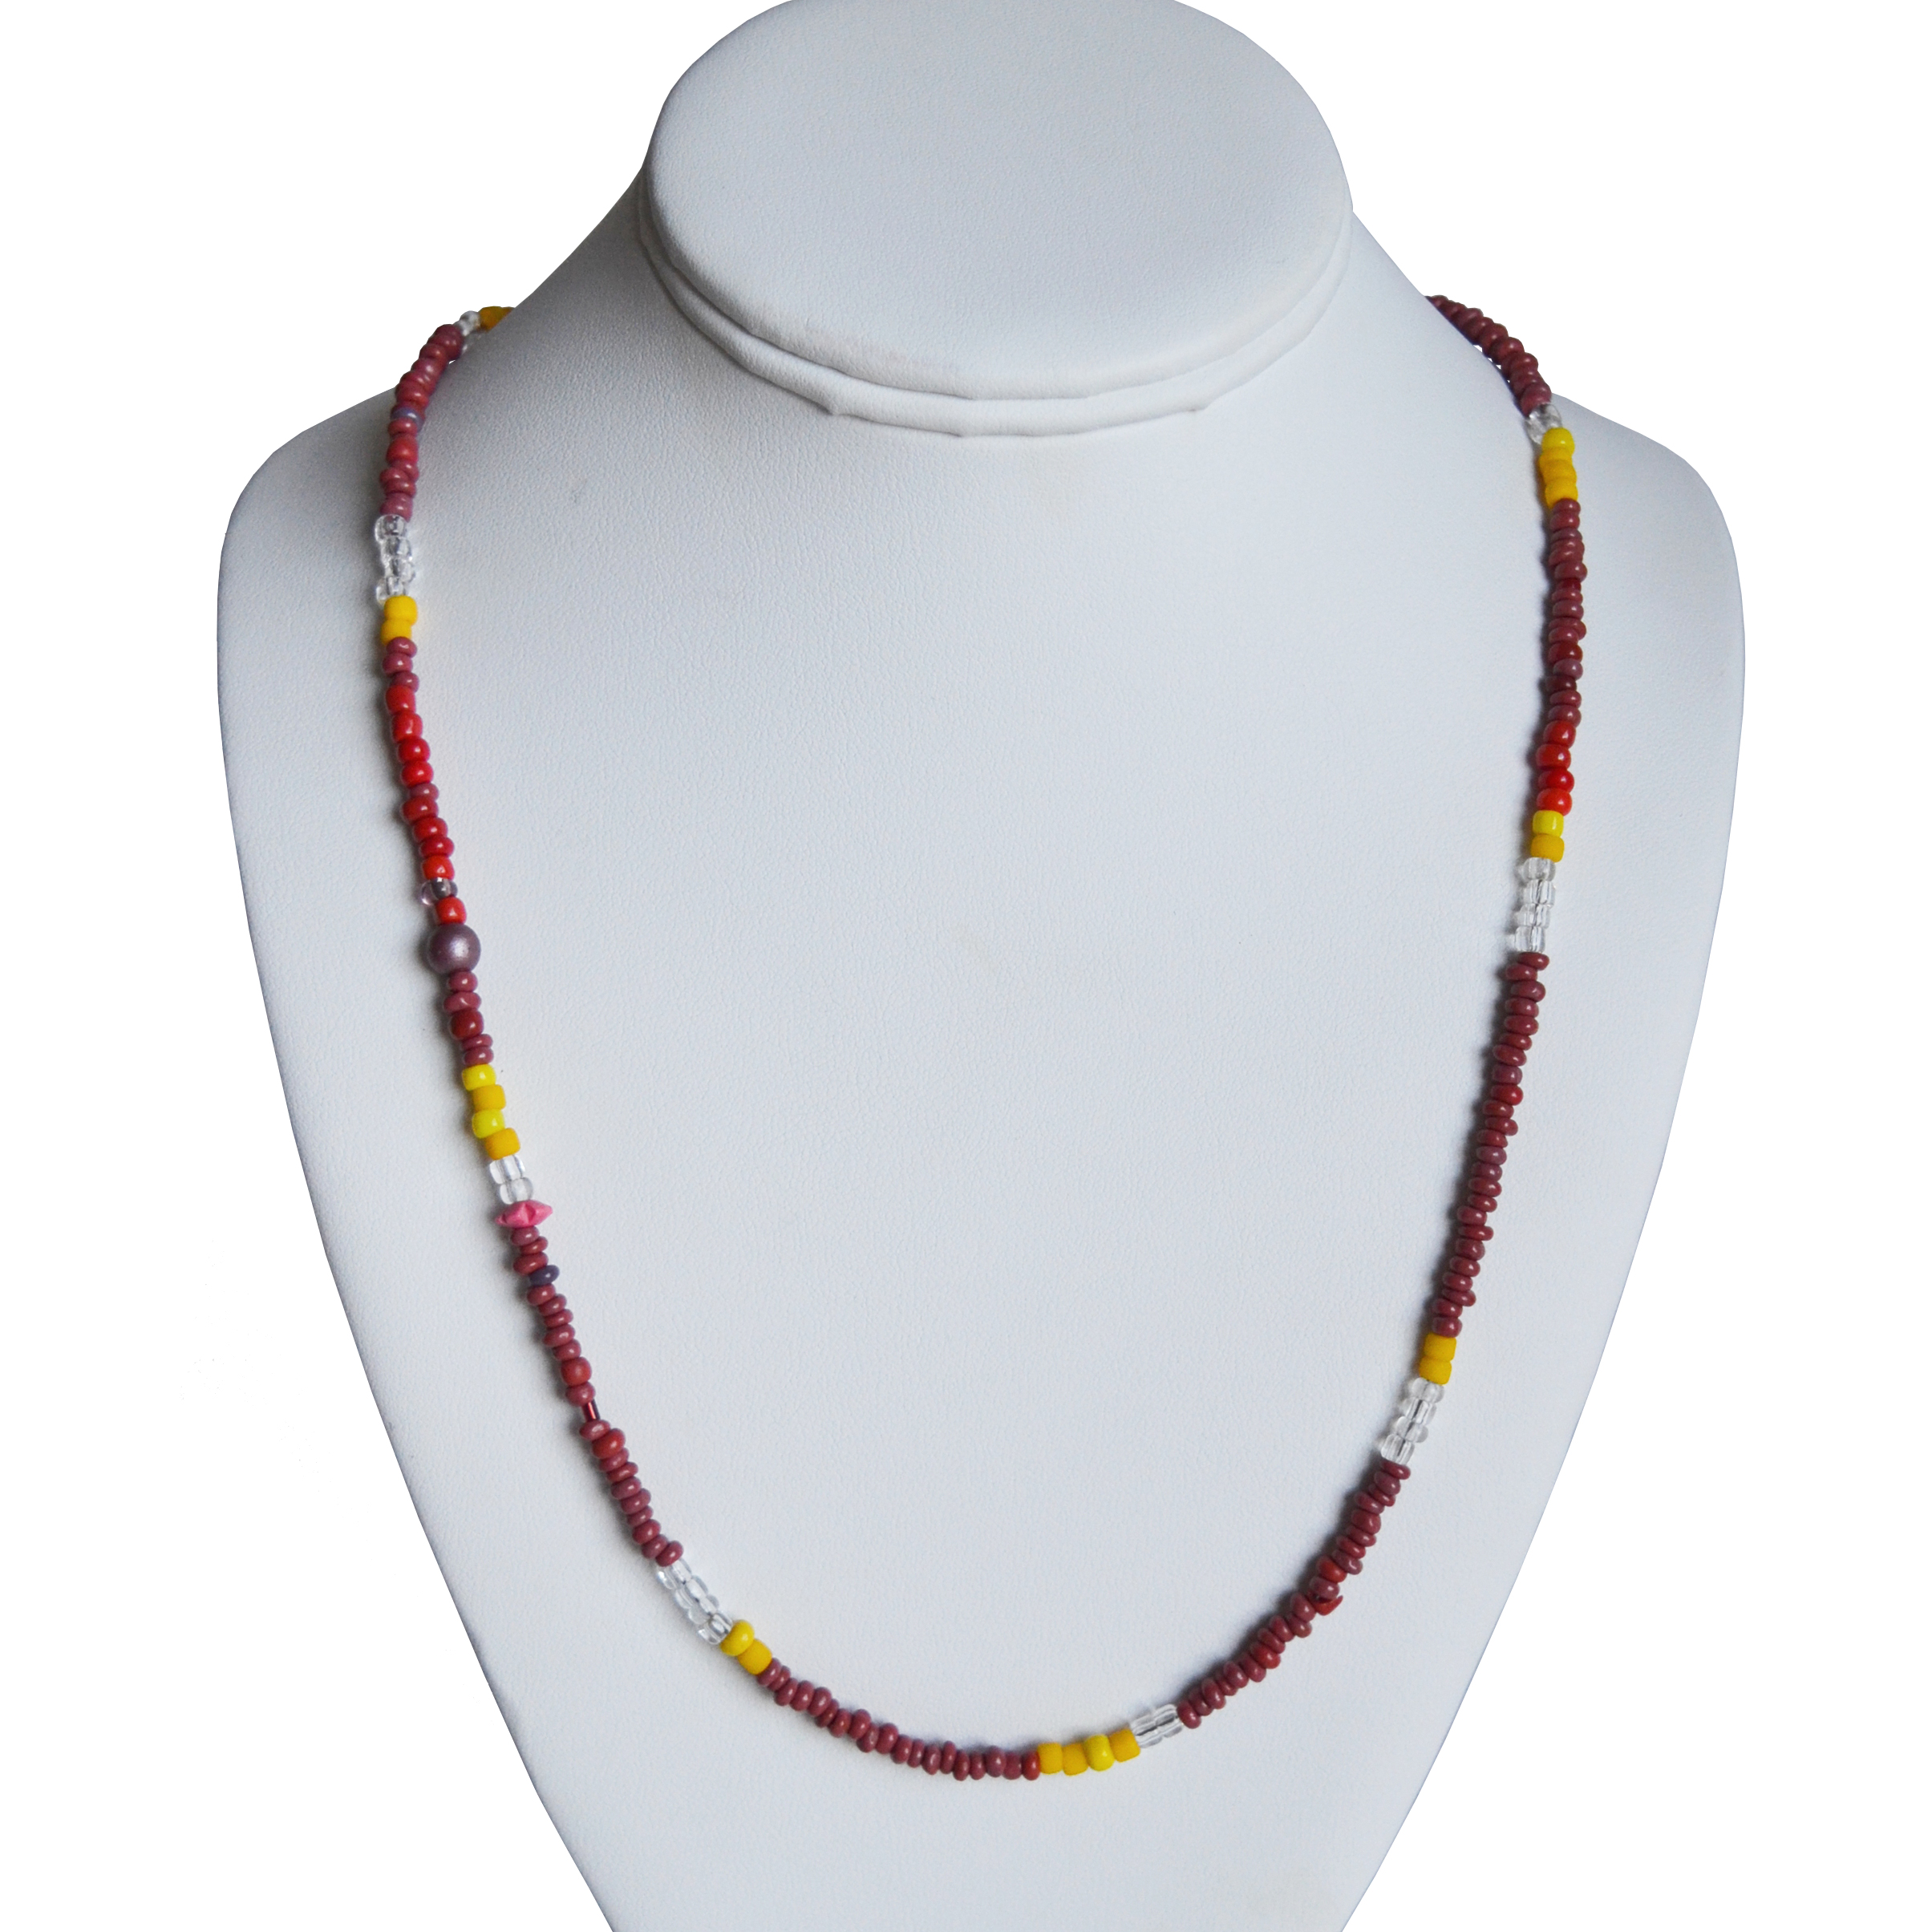 Red and yellow necklace by Amy Caliri